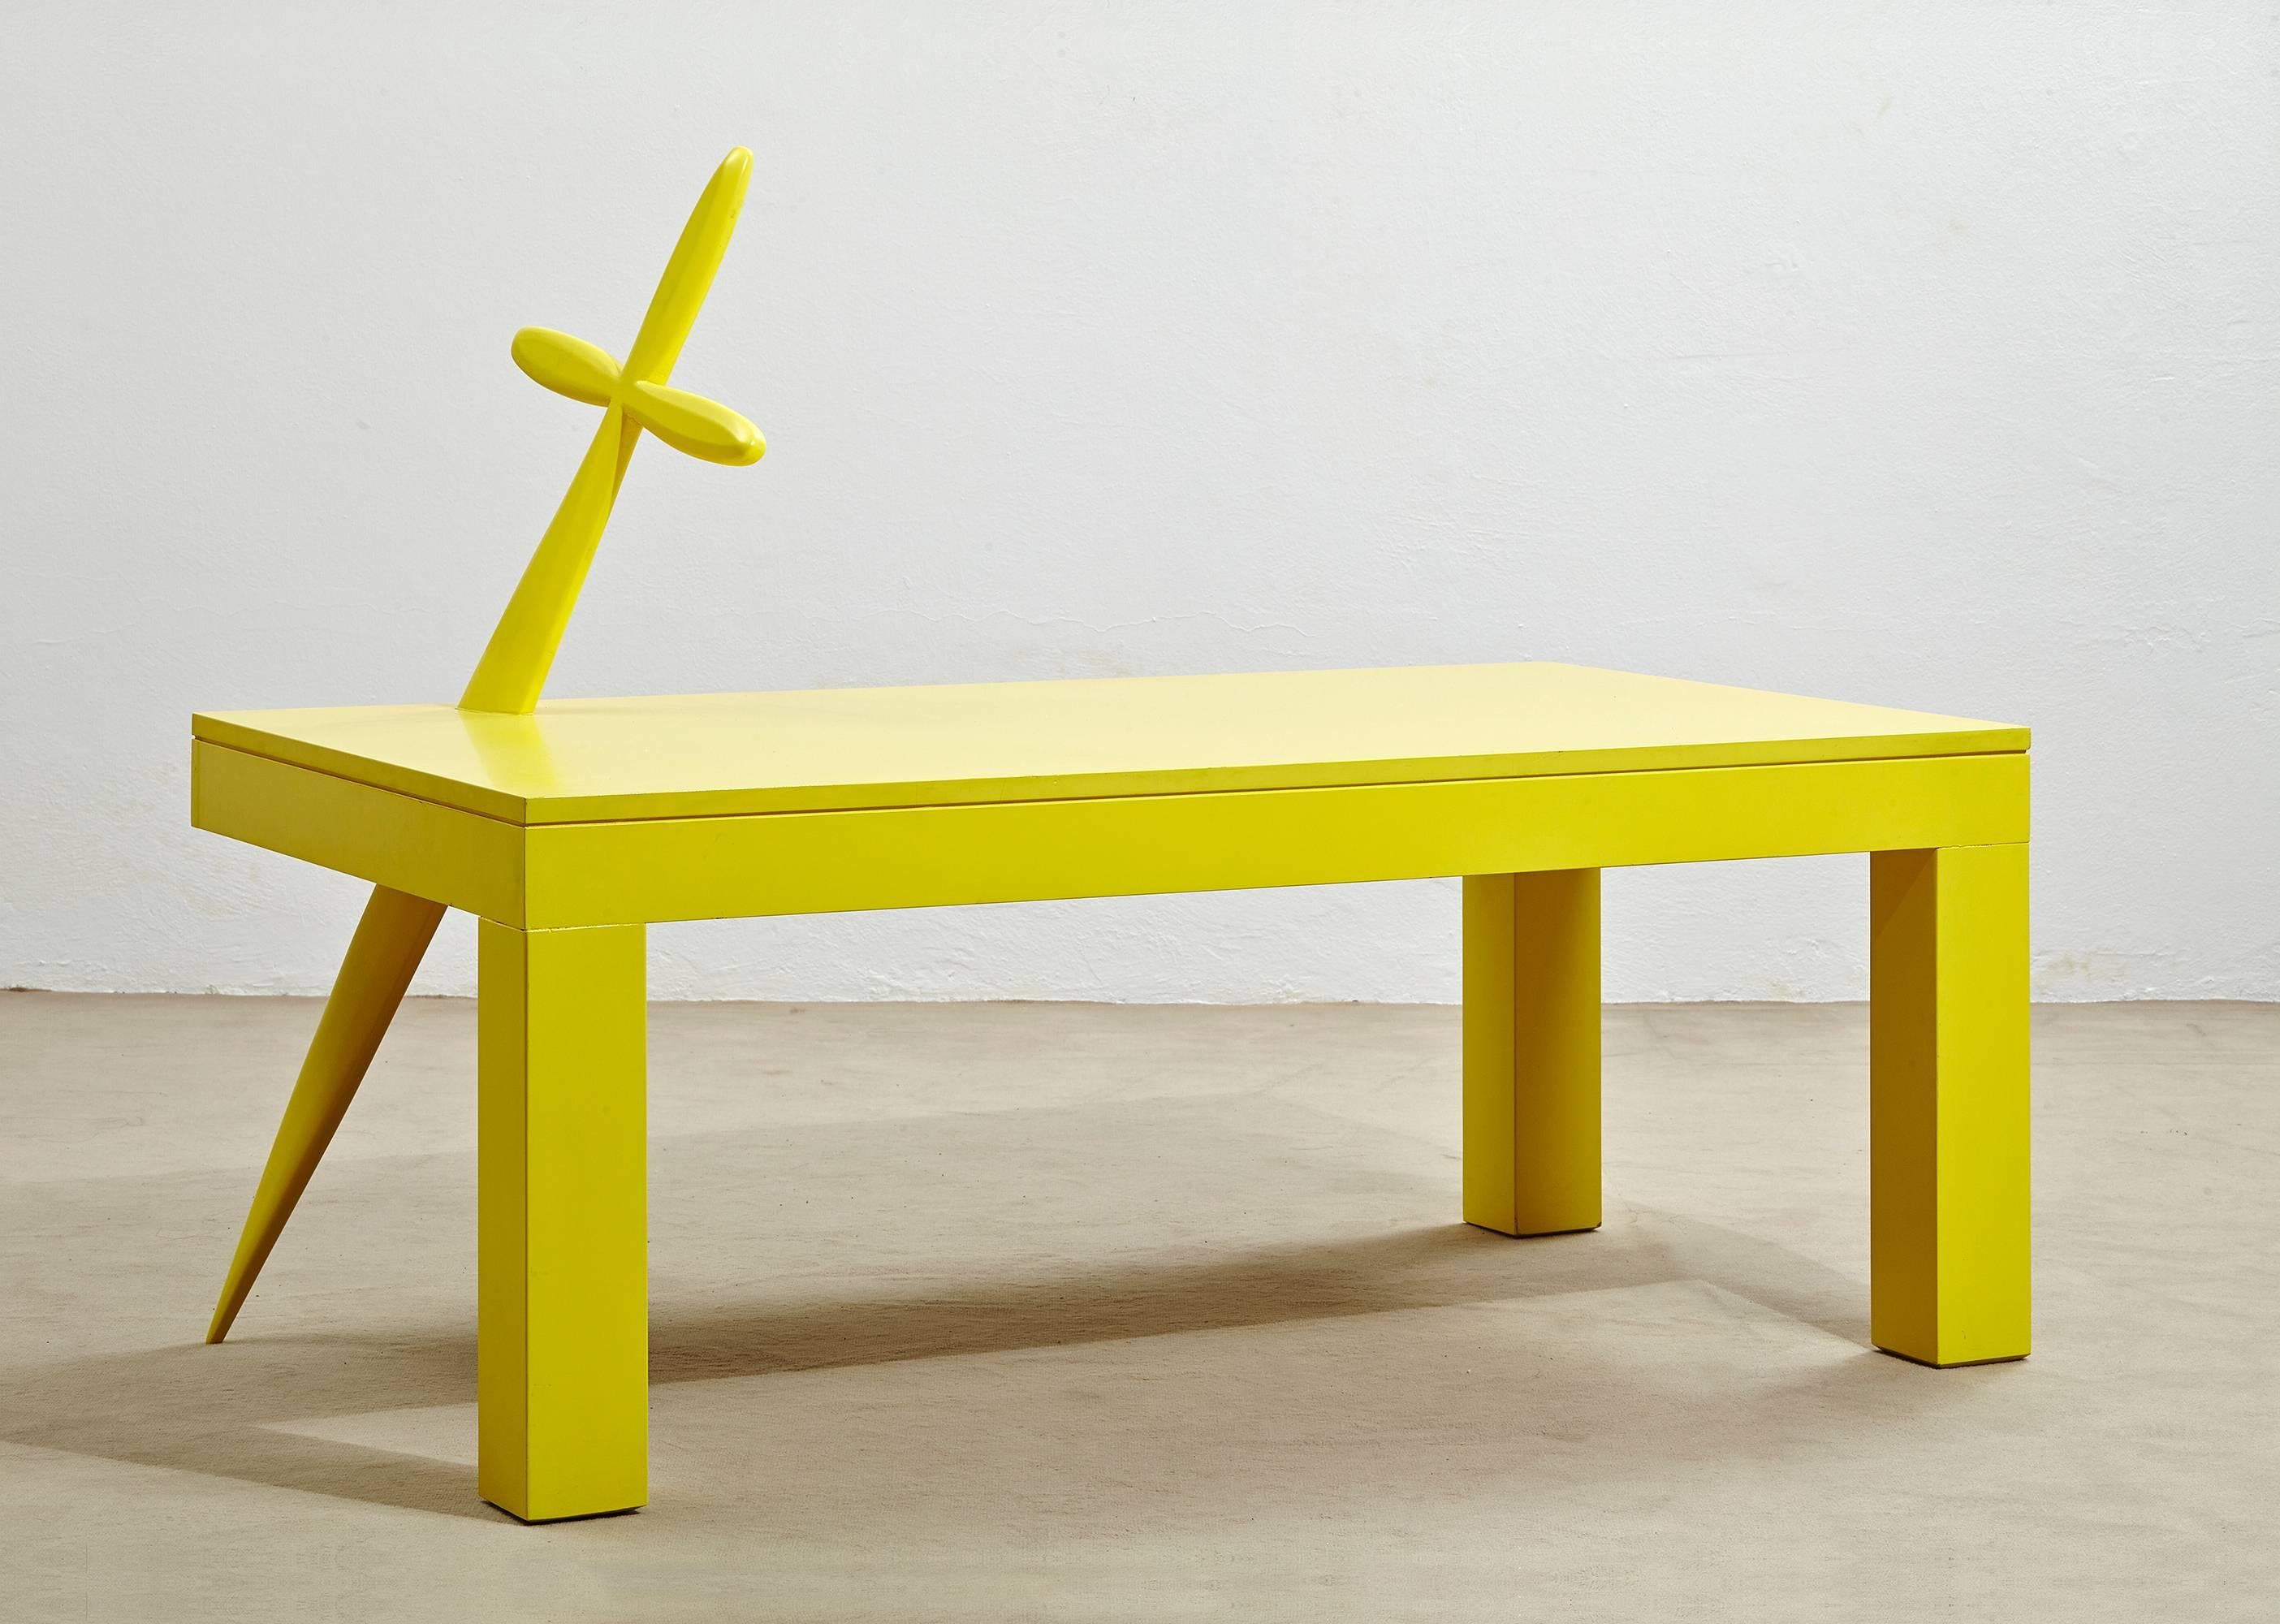 “Heroes” is a bright yellow low console table by contemporary Italian designer Alberto Biagetti. The piece could be described as “Pop design” as it is a perfect example of how the designer takes popular symbols, de-contextualizes them and inserts